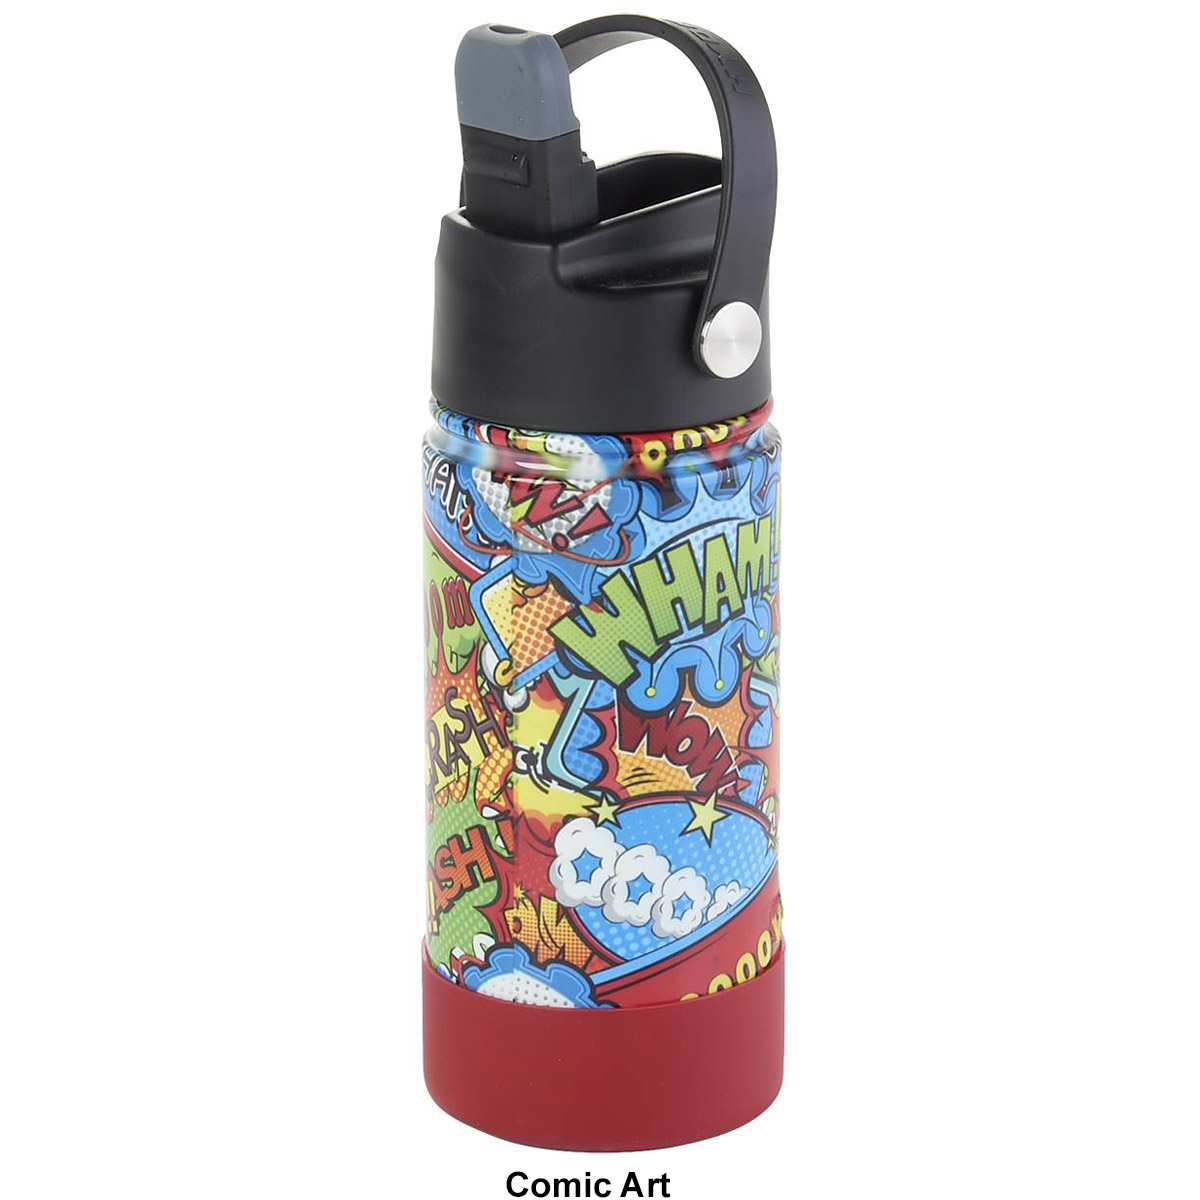 14oz. Triple Wall Insulated Bottle